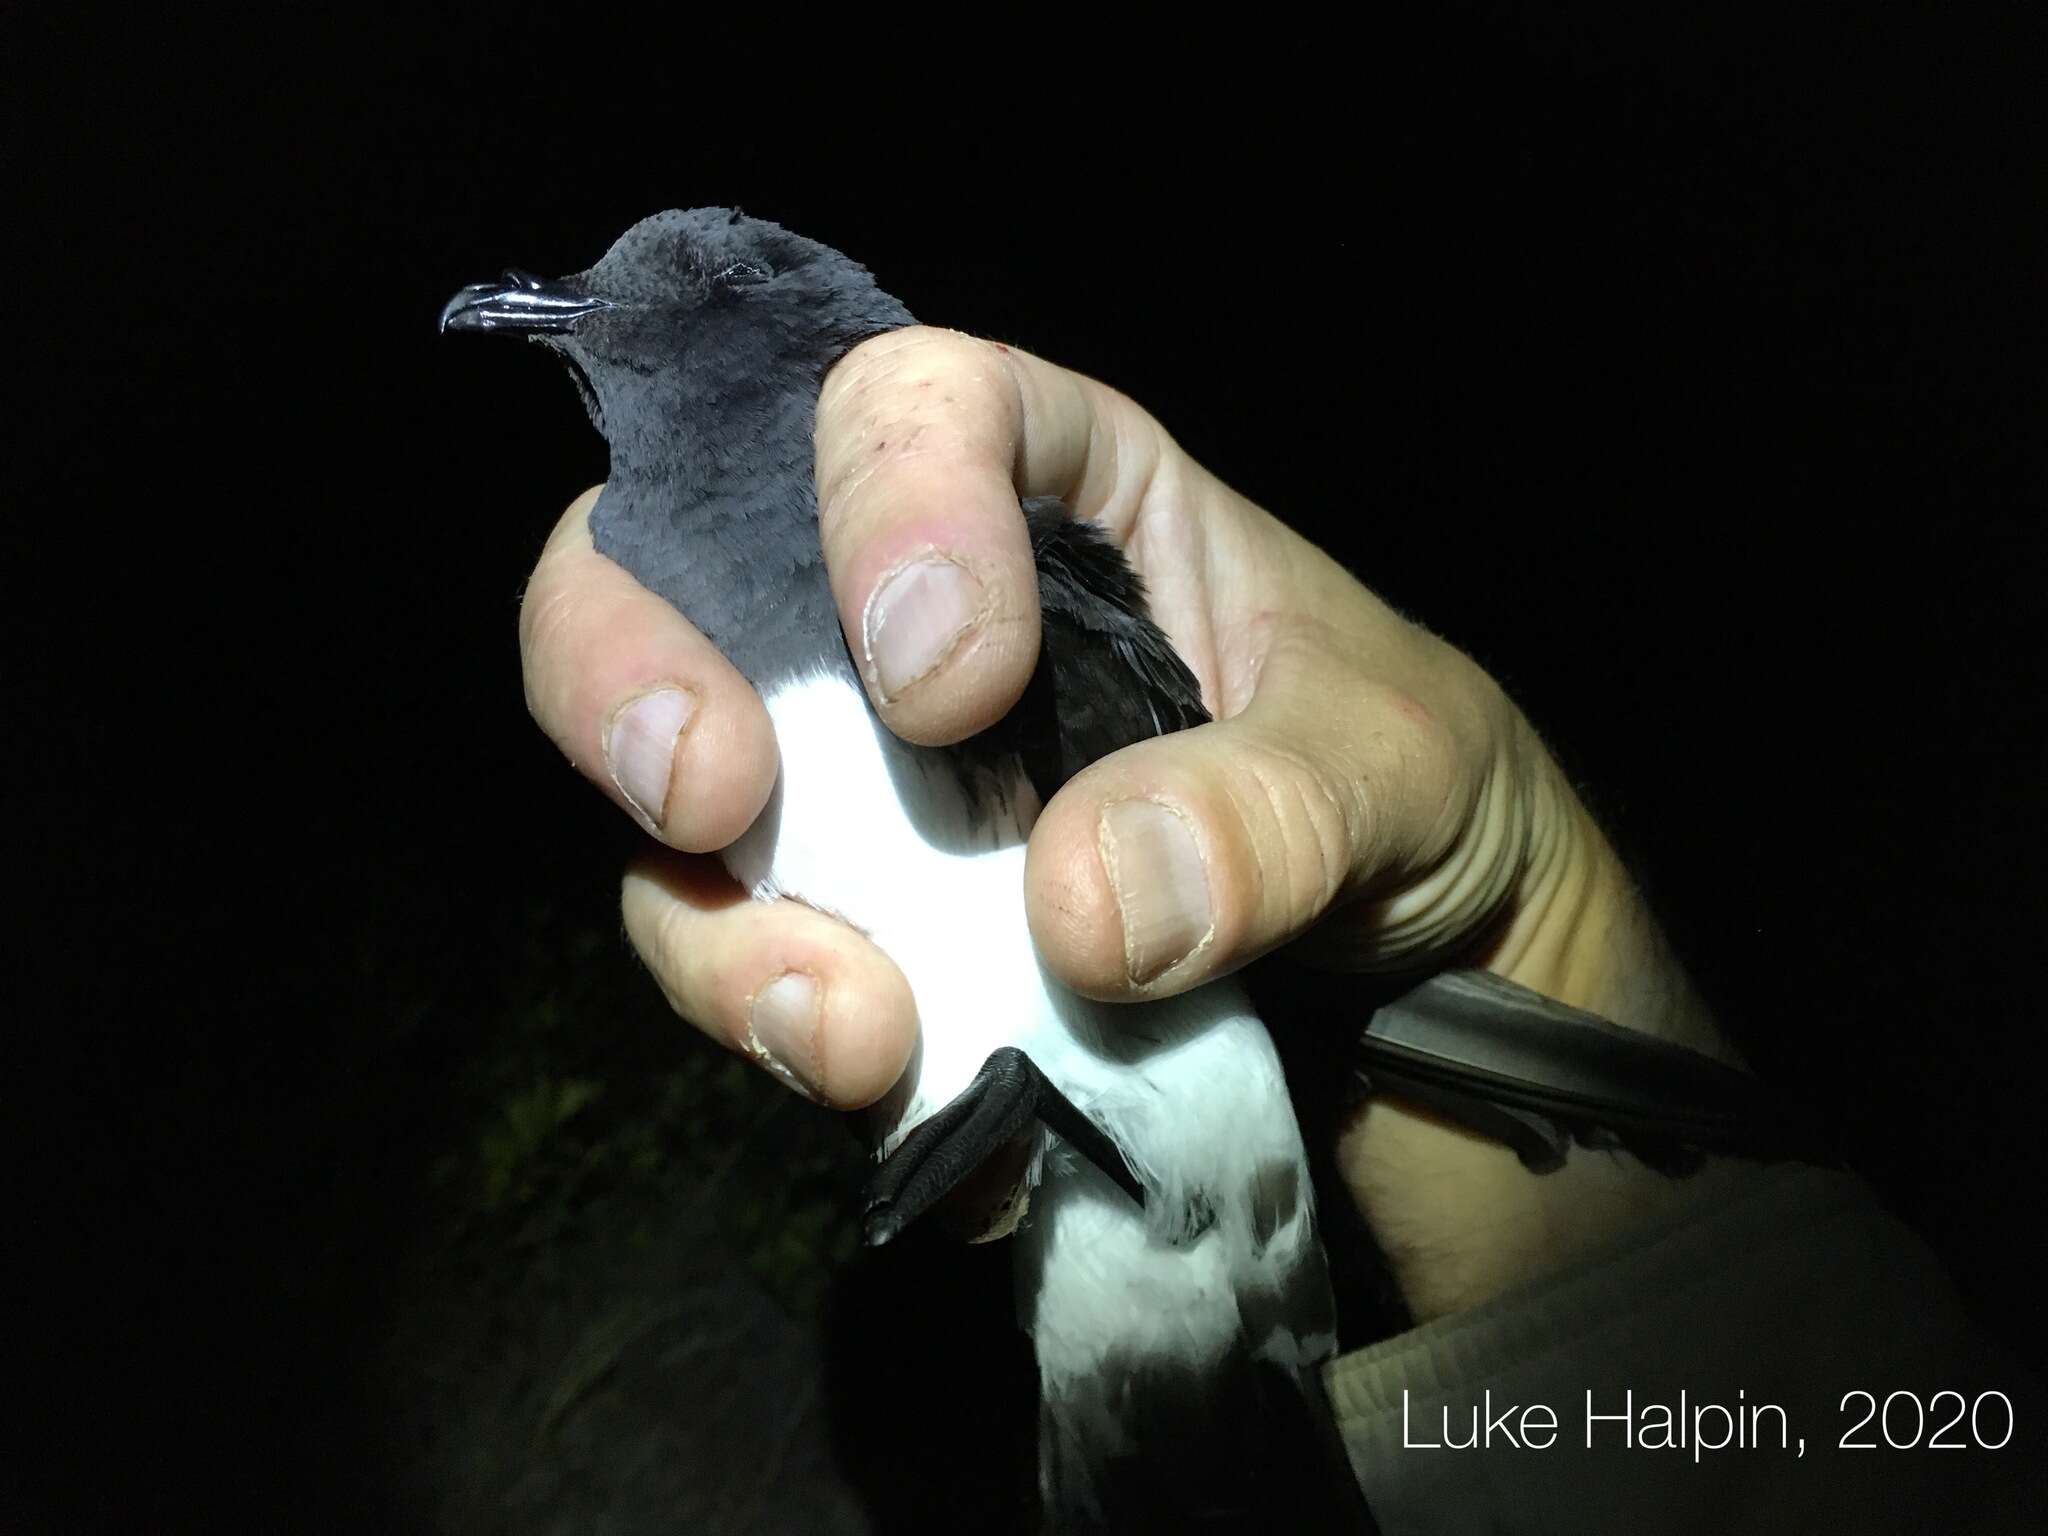 Image of White-bellied Storm Petrel